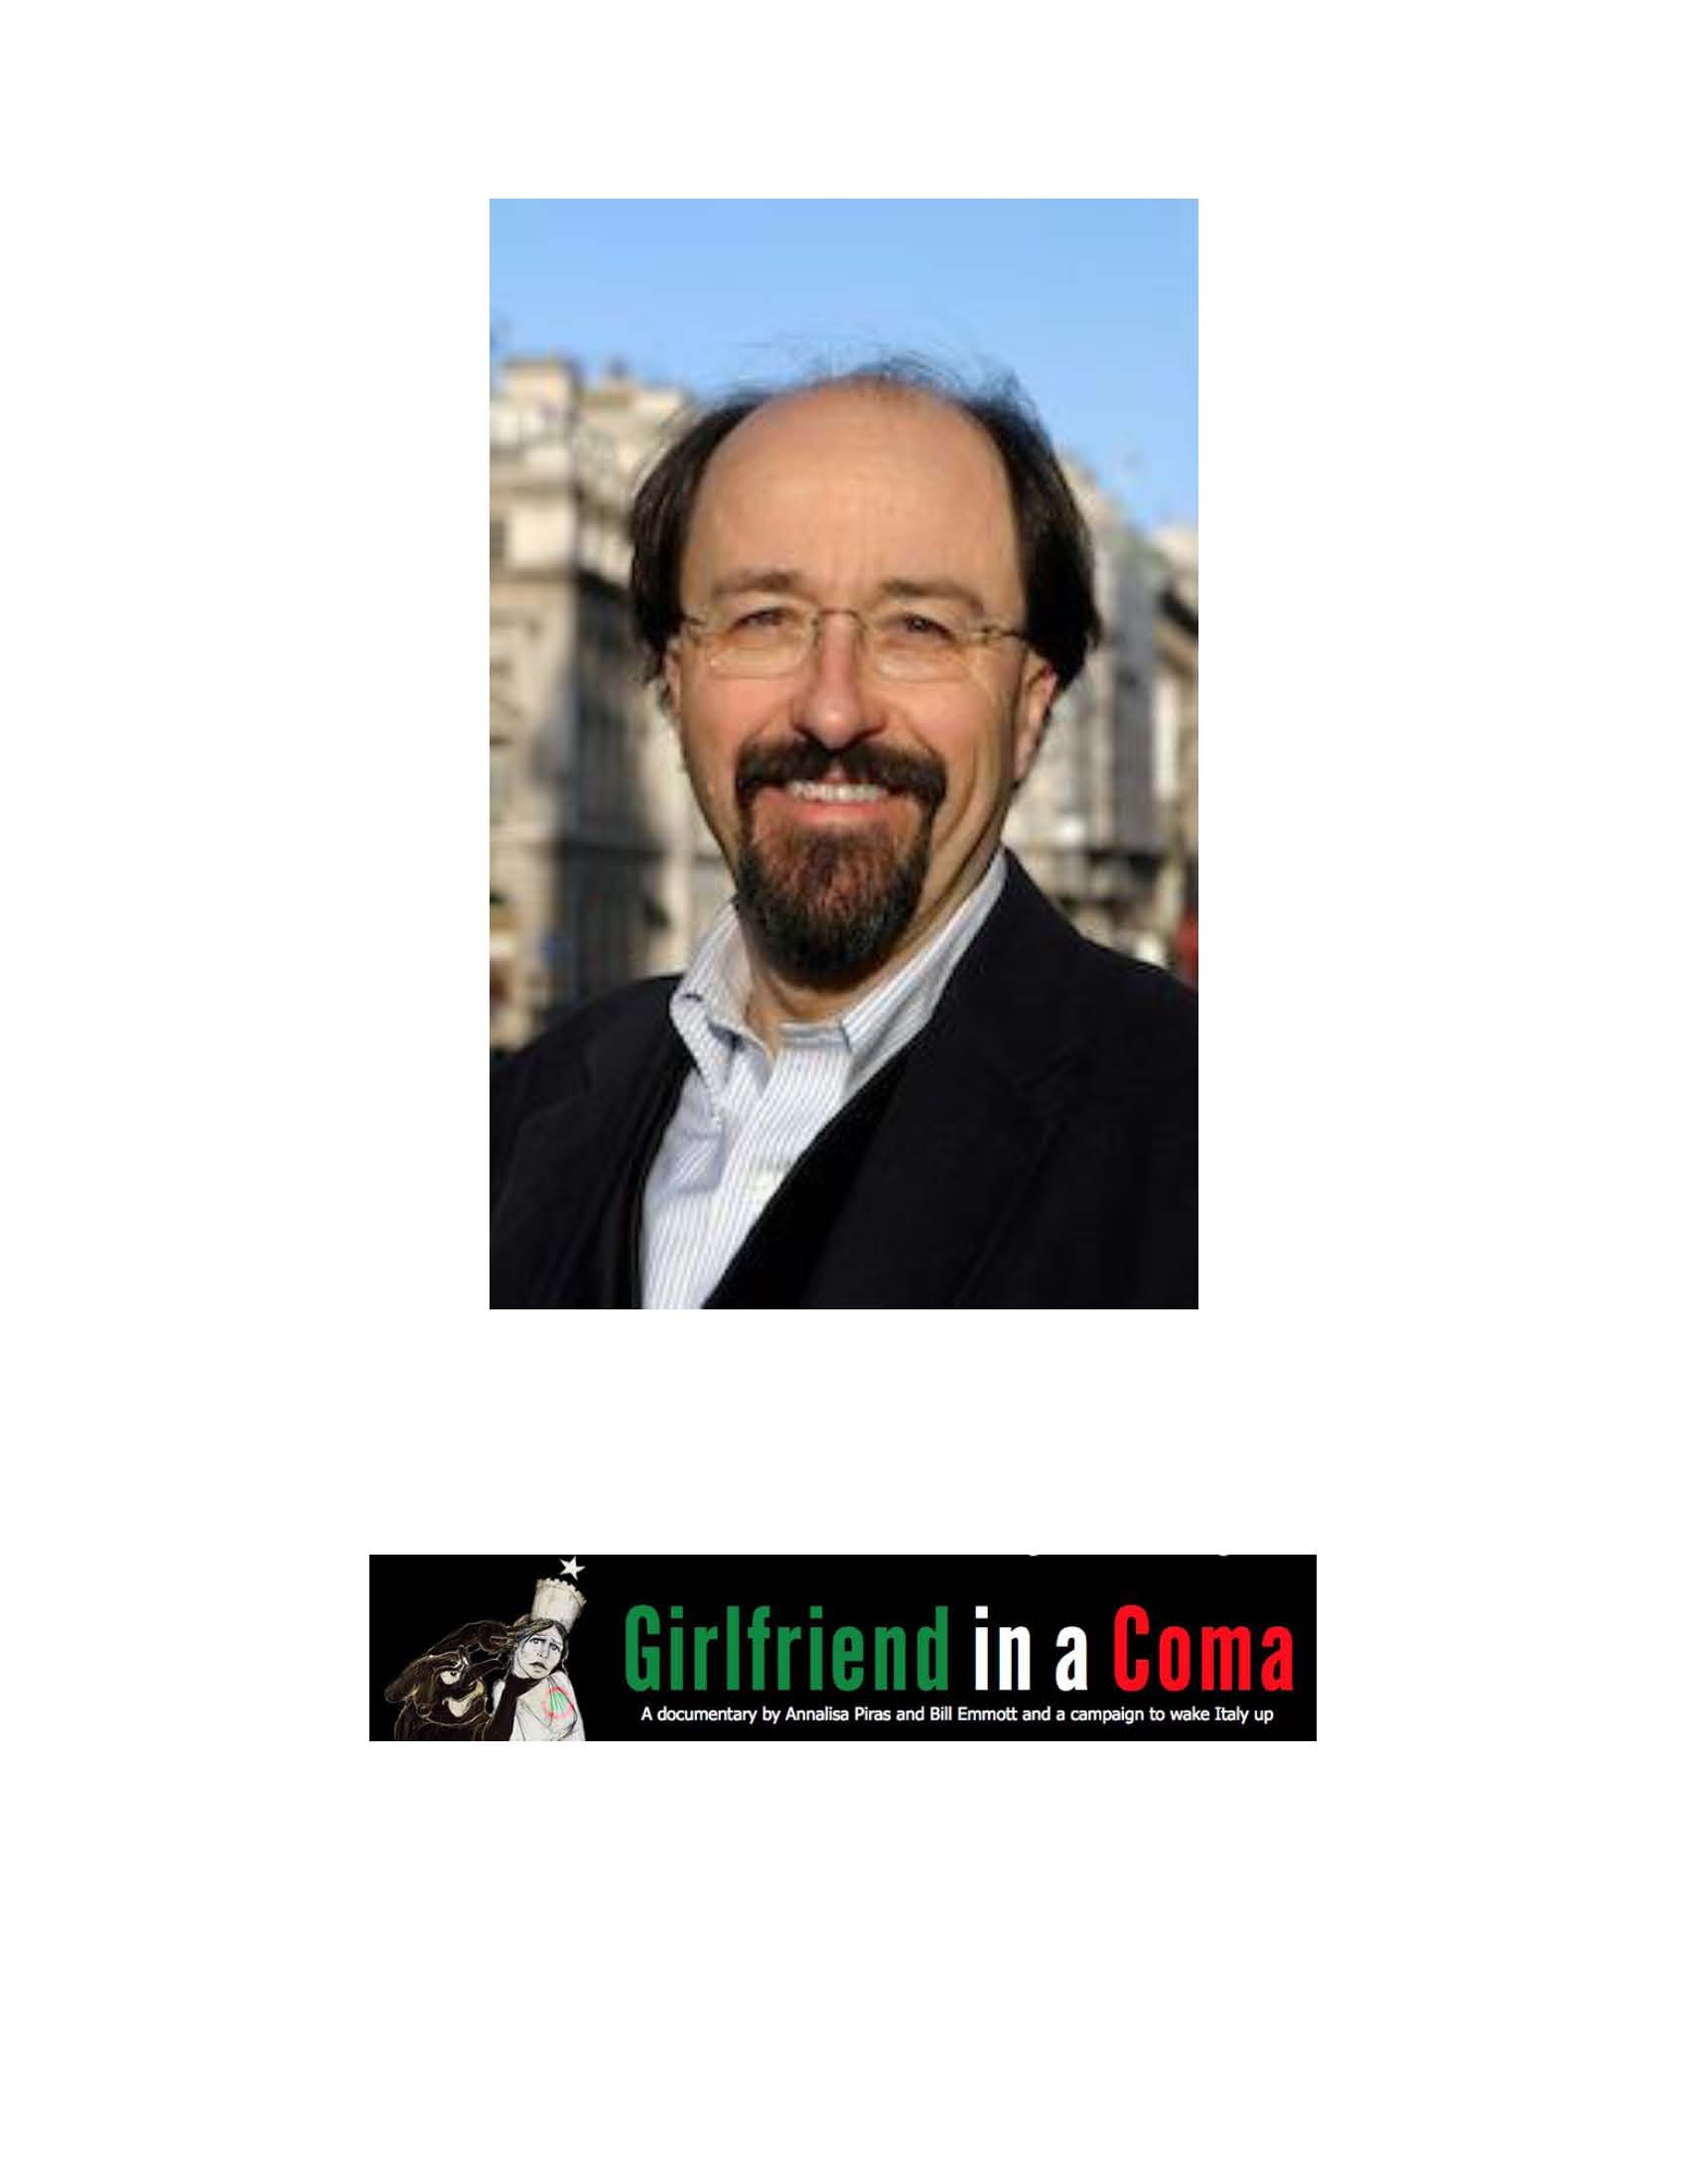 Former Economist Editor Bill Emmott Presents His New Documentary, Girlfriend in a Coma